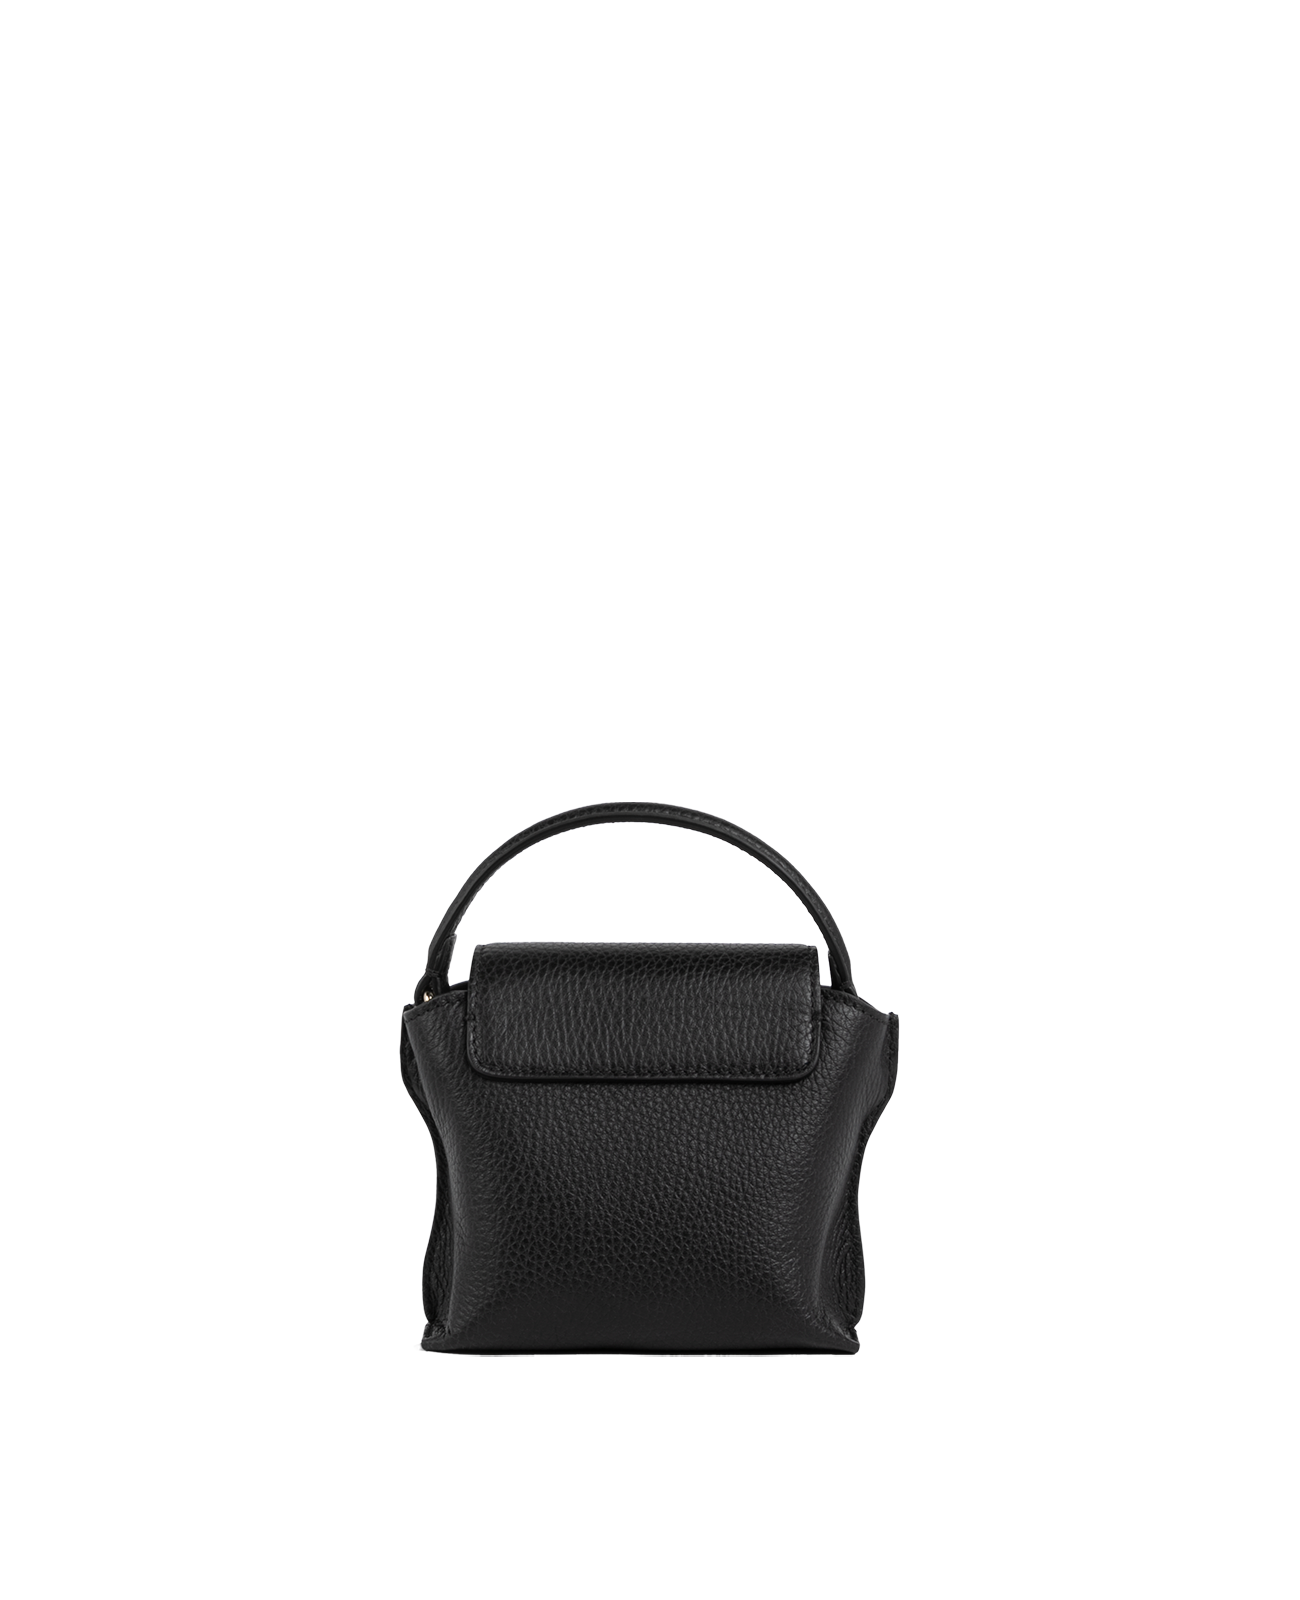 Cross-body bag in Italian full-grain leather, semi-aniline calf Italian leather with detachable shoulder strap.Three compartments, zip pocket in the back compartment. Magnetic flap closure with logo. Color: Black. Size:Mini